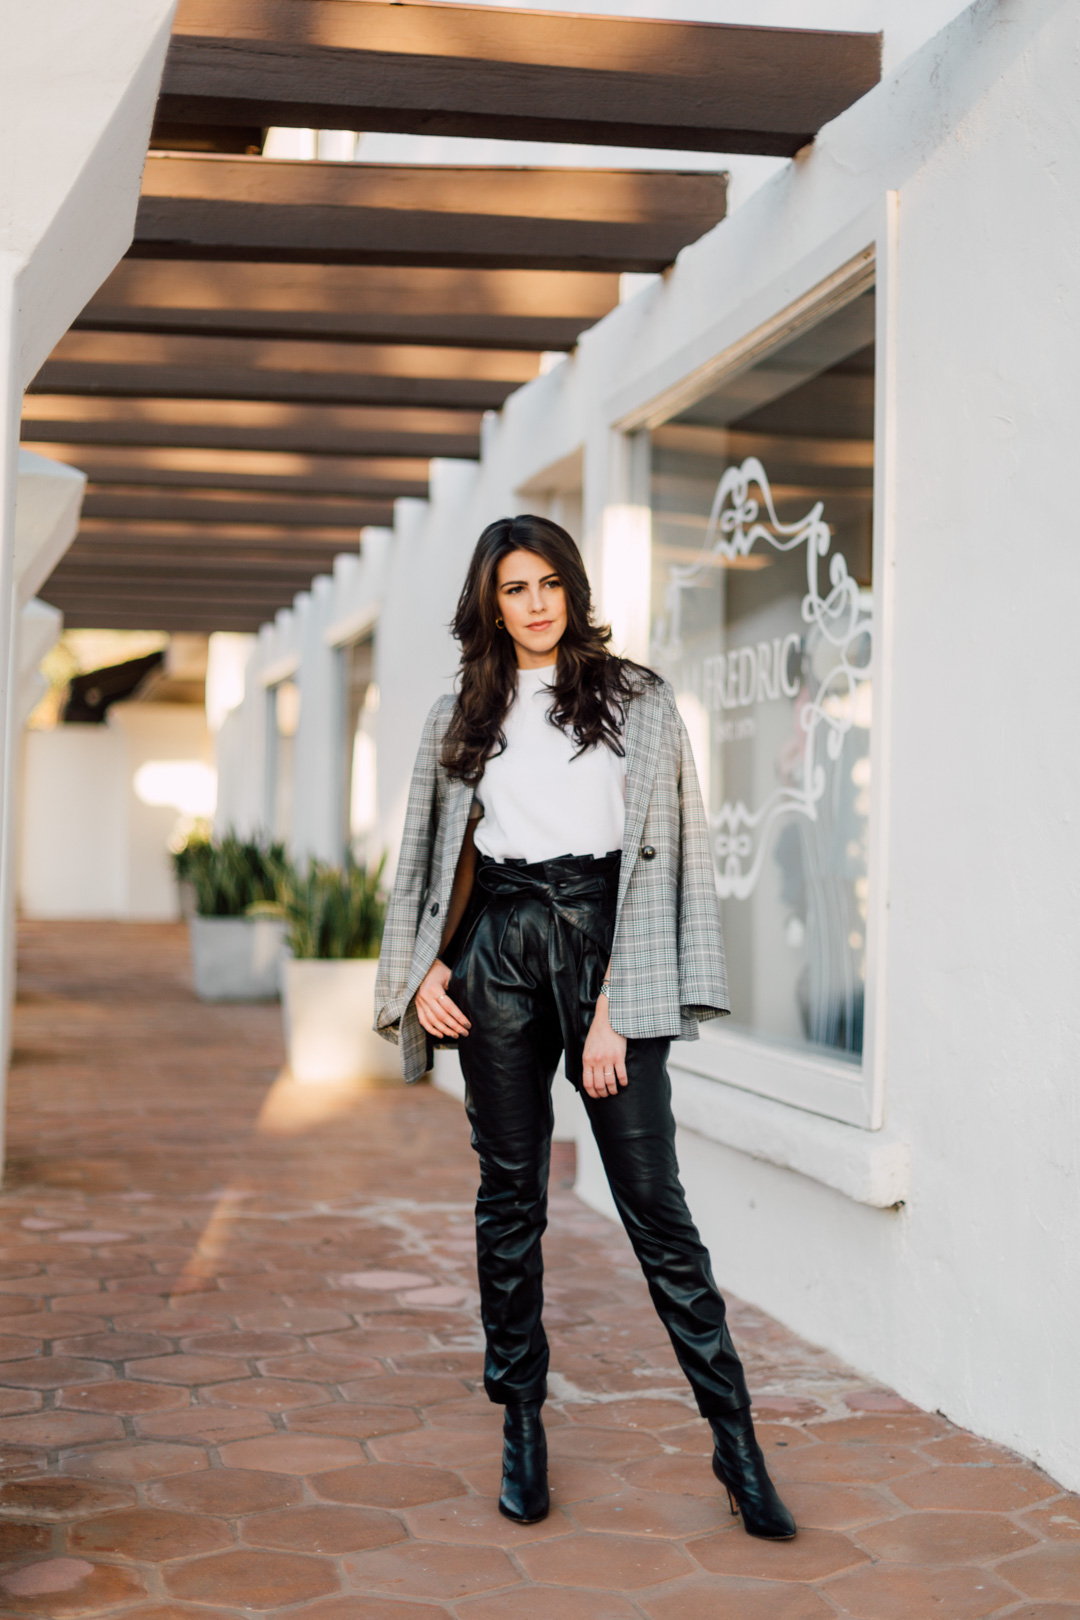 Jackie Roque Salas styling leather pants, Anine Bing blazer and a white tee in Malibu.